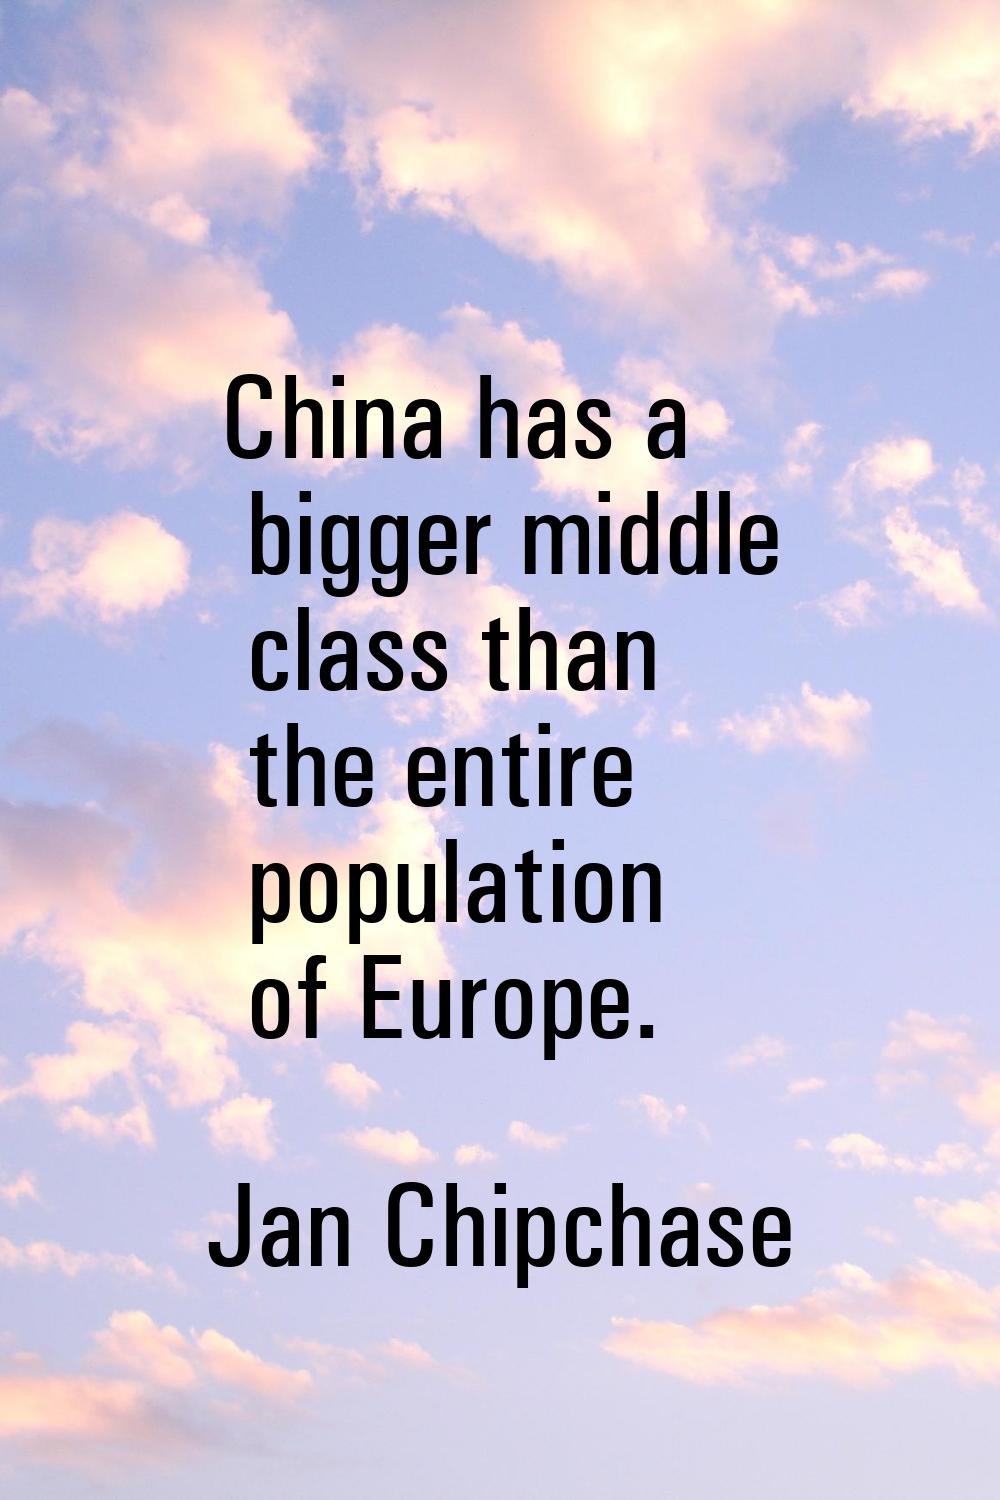 China has a bigger middle class than the entire population of Europe.